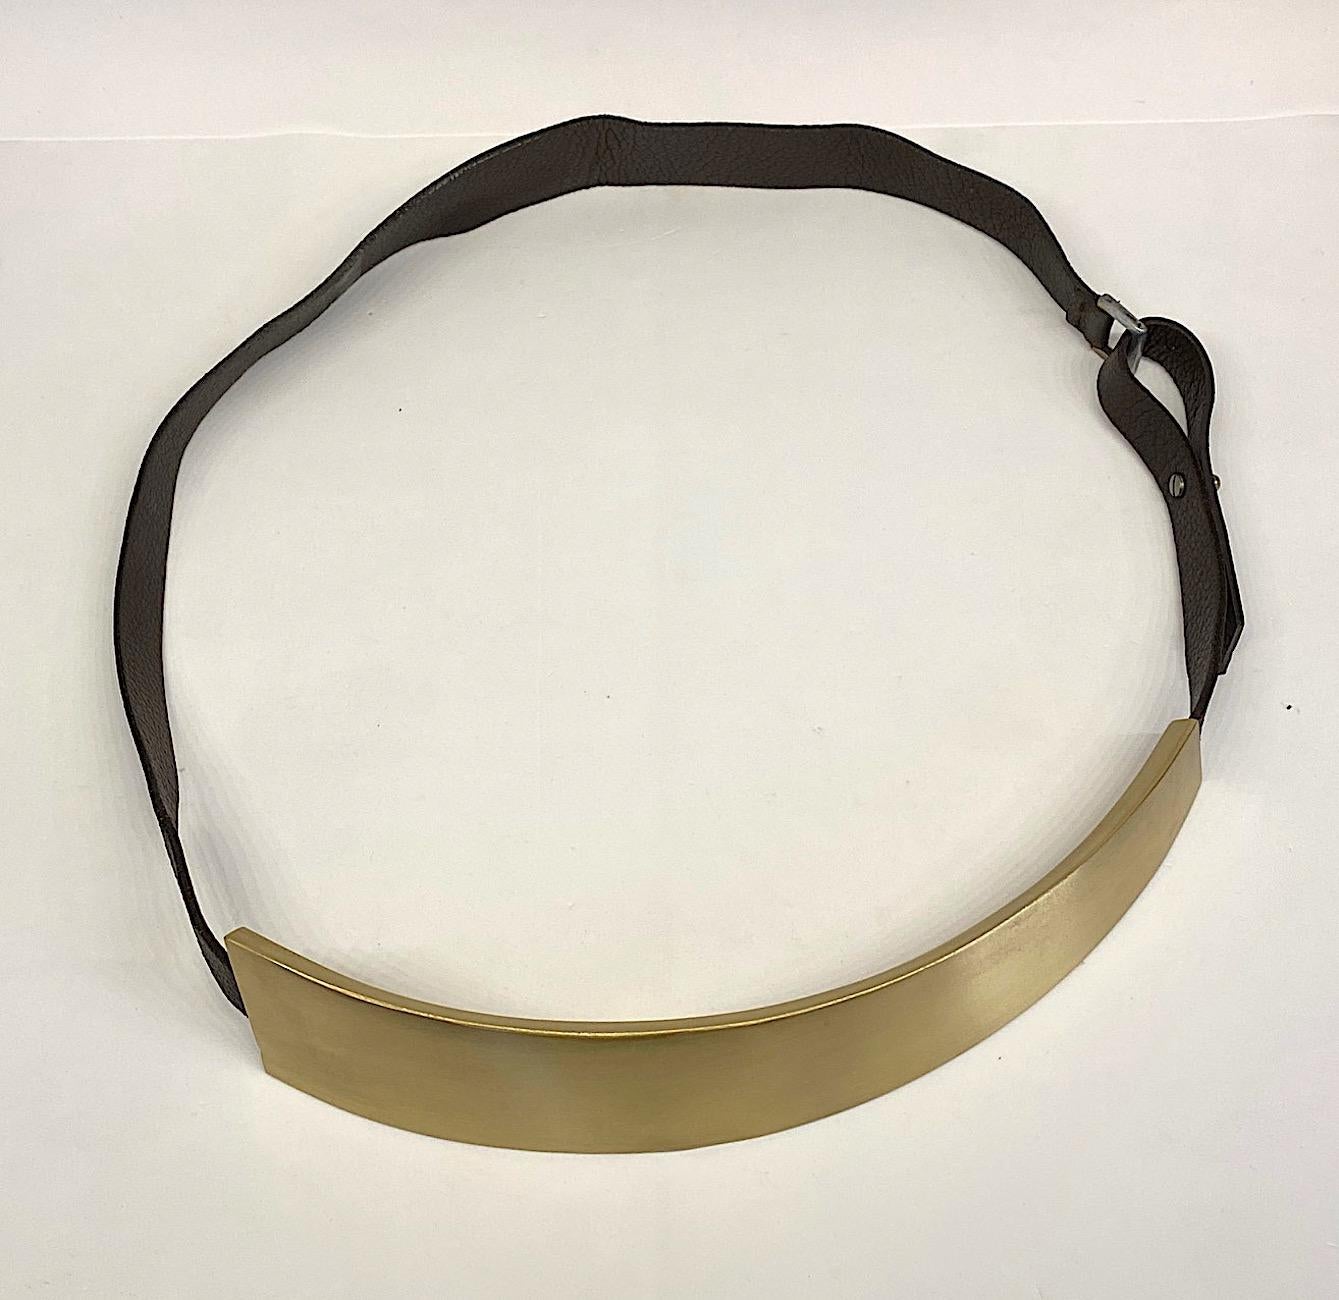 A truly unique statement belt from the 1980s. The belt is a satin finish brass and leather. The front piece is a 2.5 inches wide on one side, 1.25 inches wide on the opposite end and 12 inches long. It is curved to fit around the body comfortably.